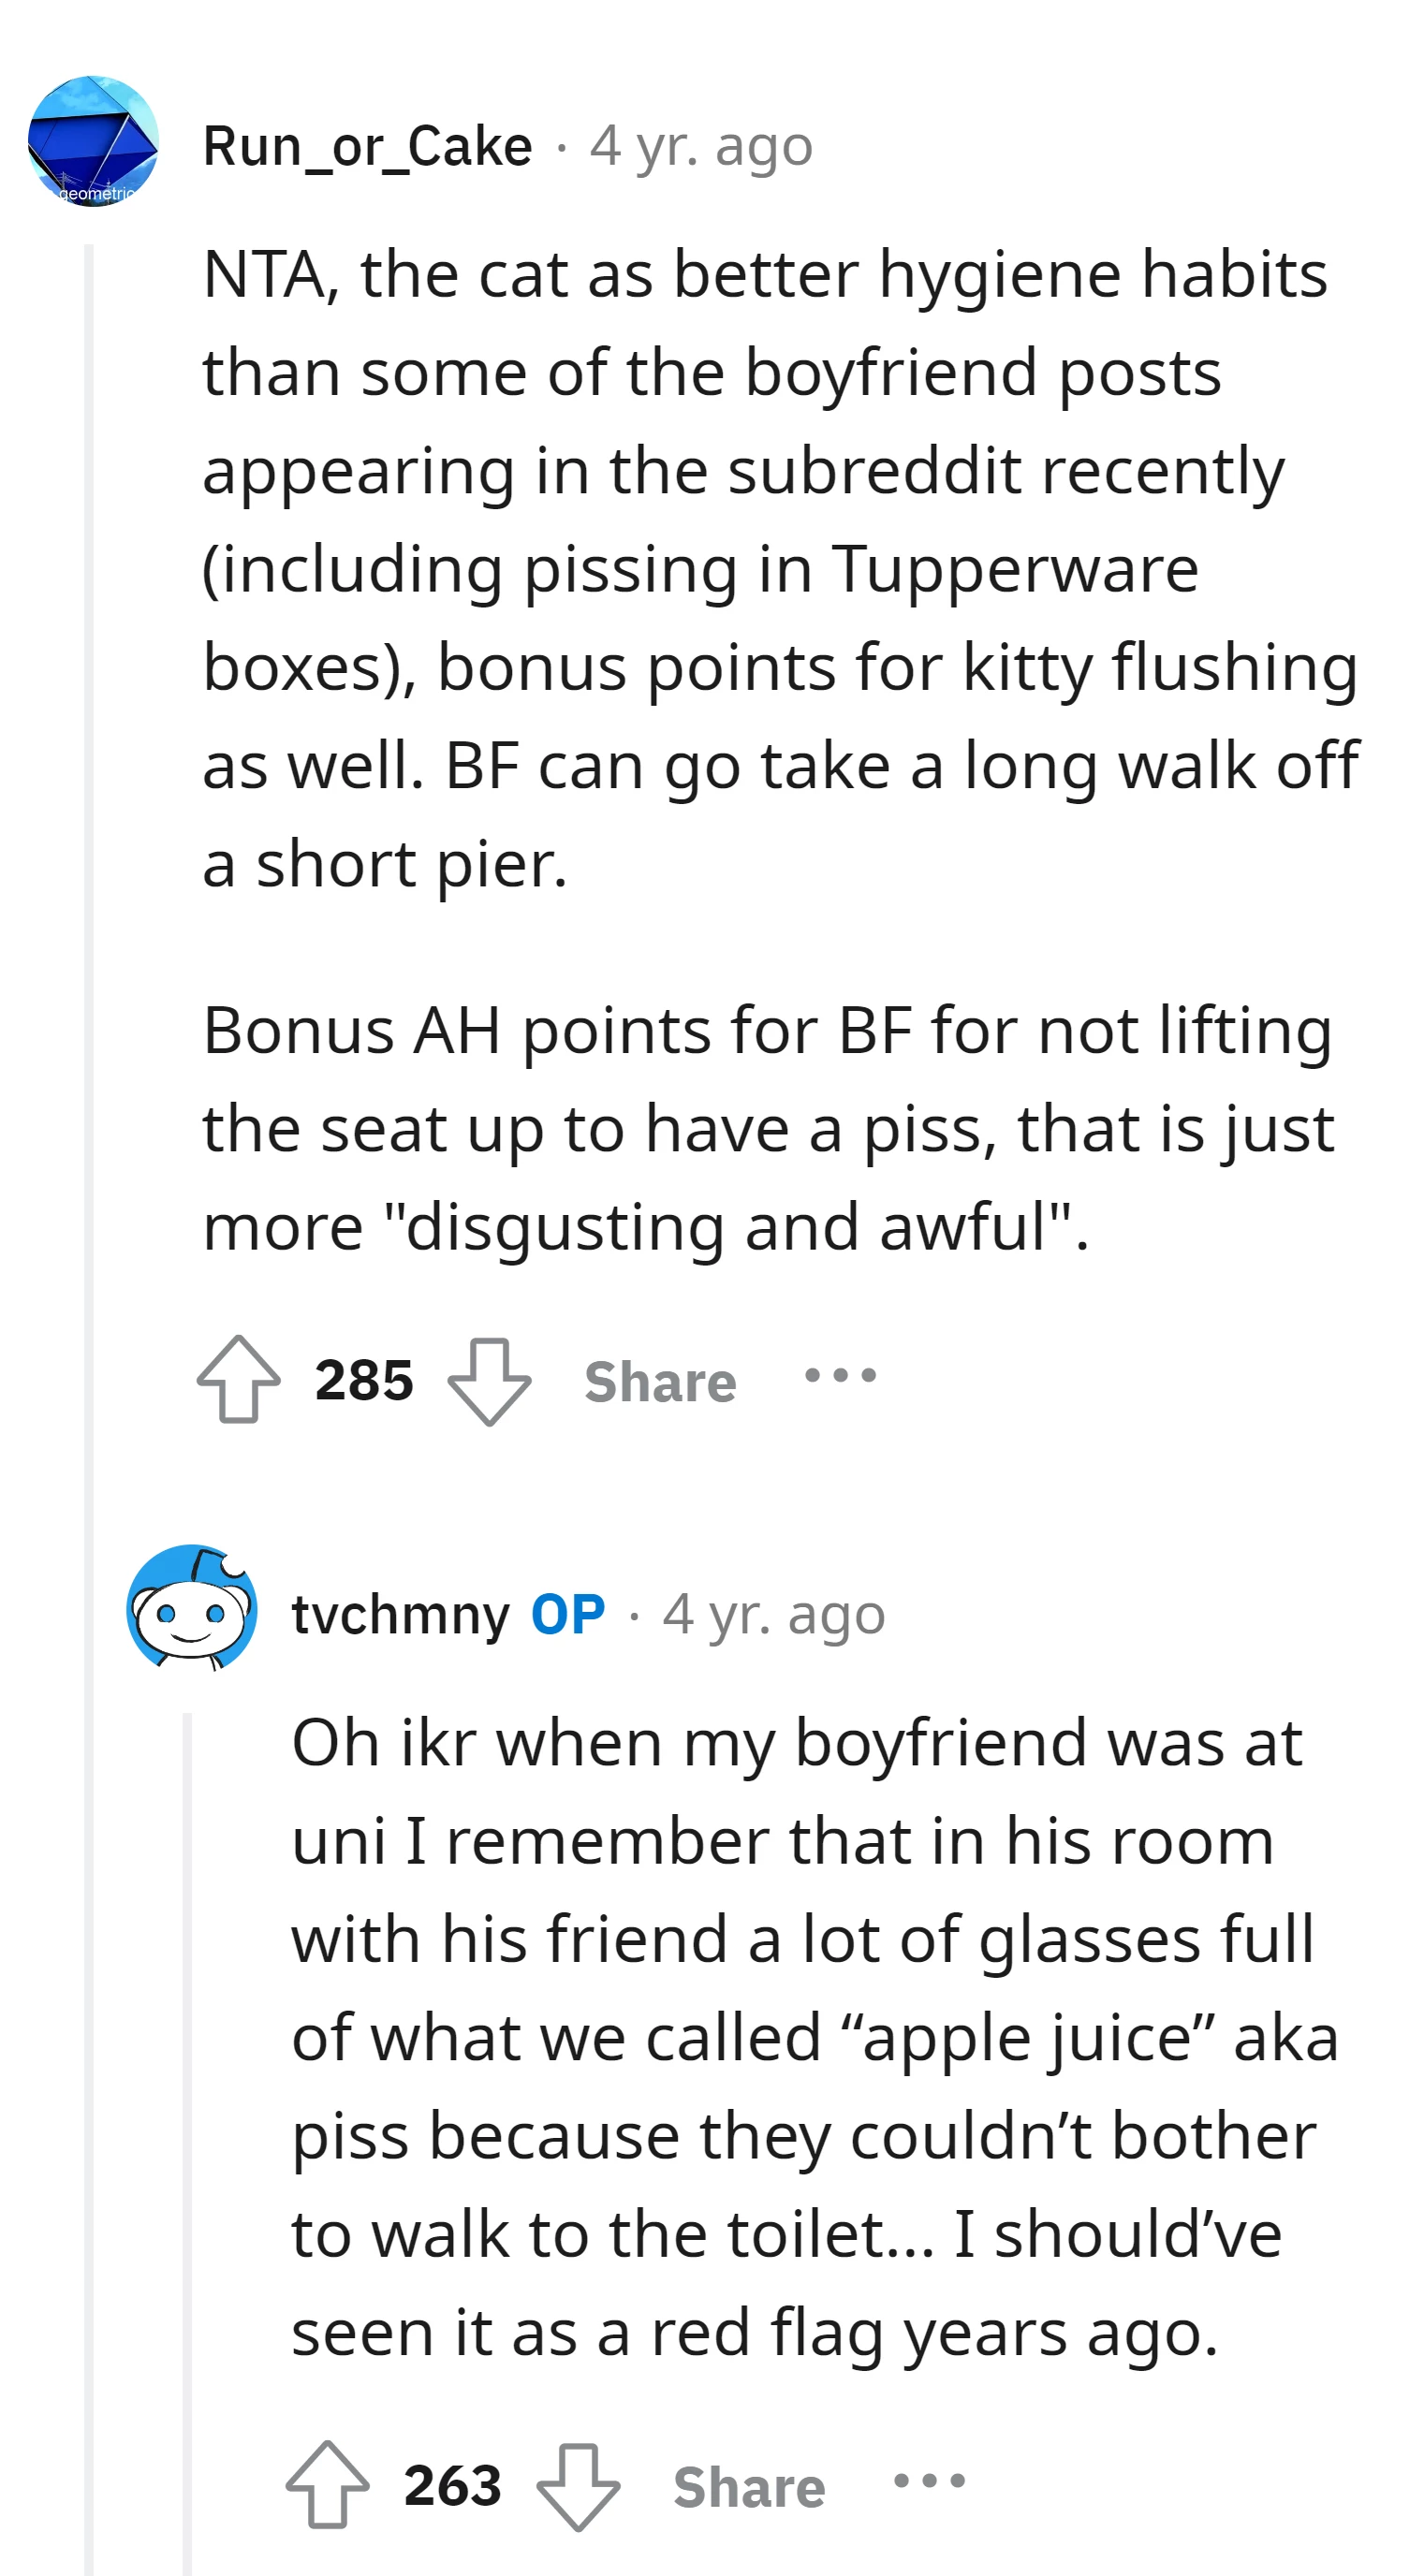 OP also shared a personal experience of the boyfriend's past unsanitary behavior